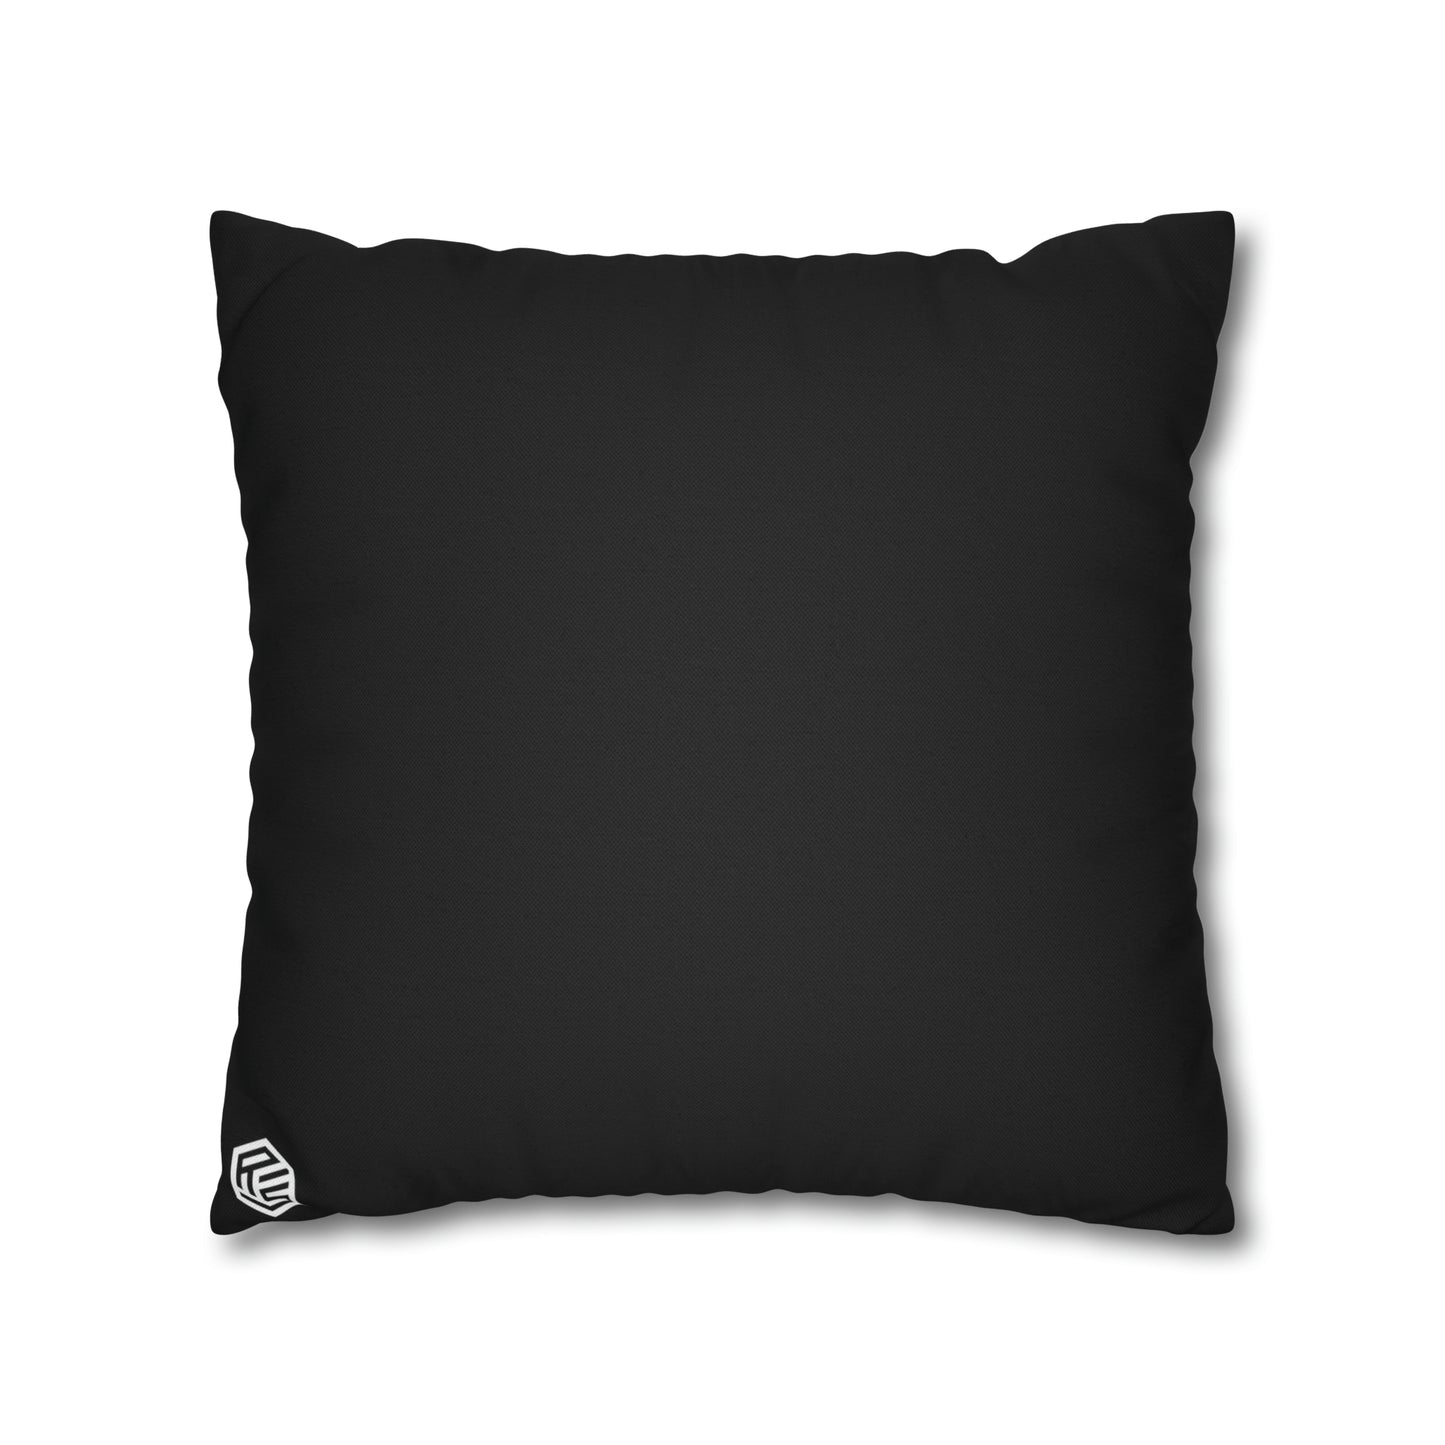 Party till you're dead Goth throw pillow cover